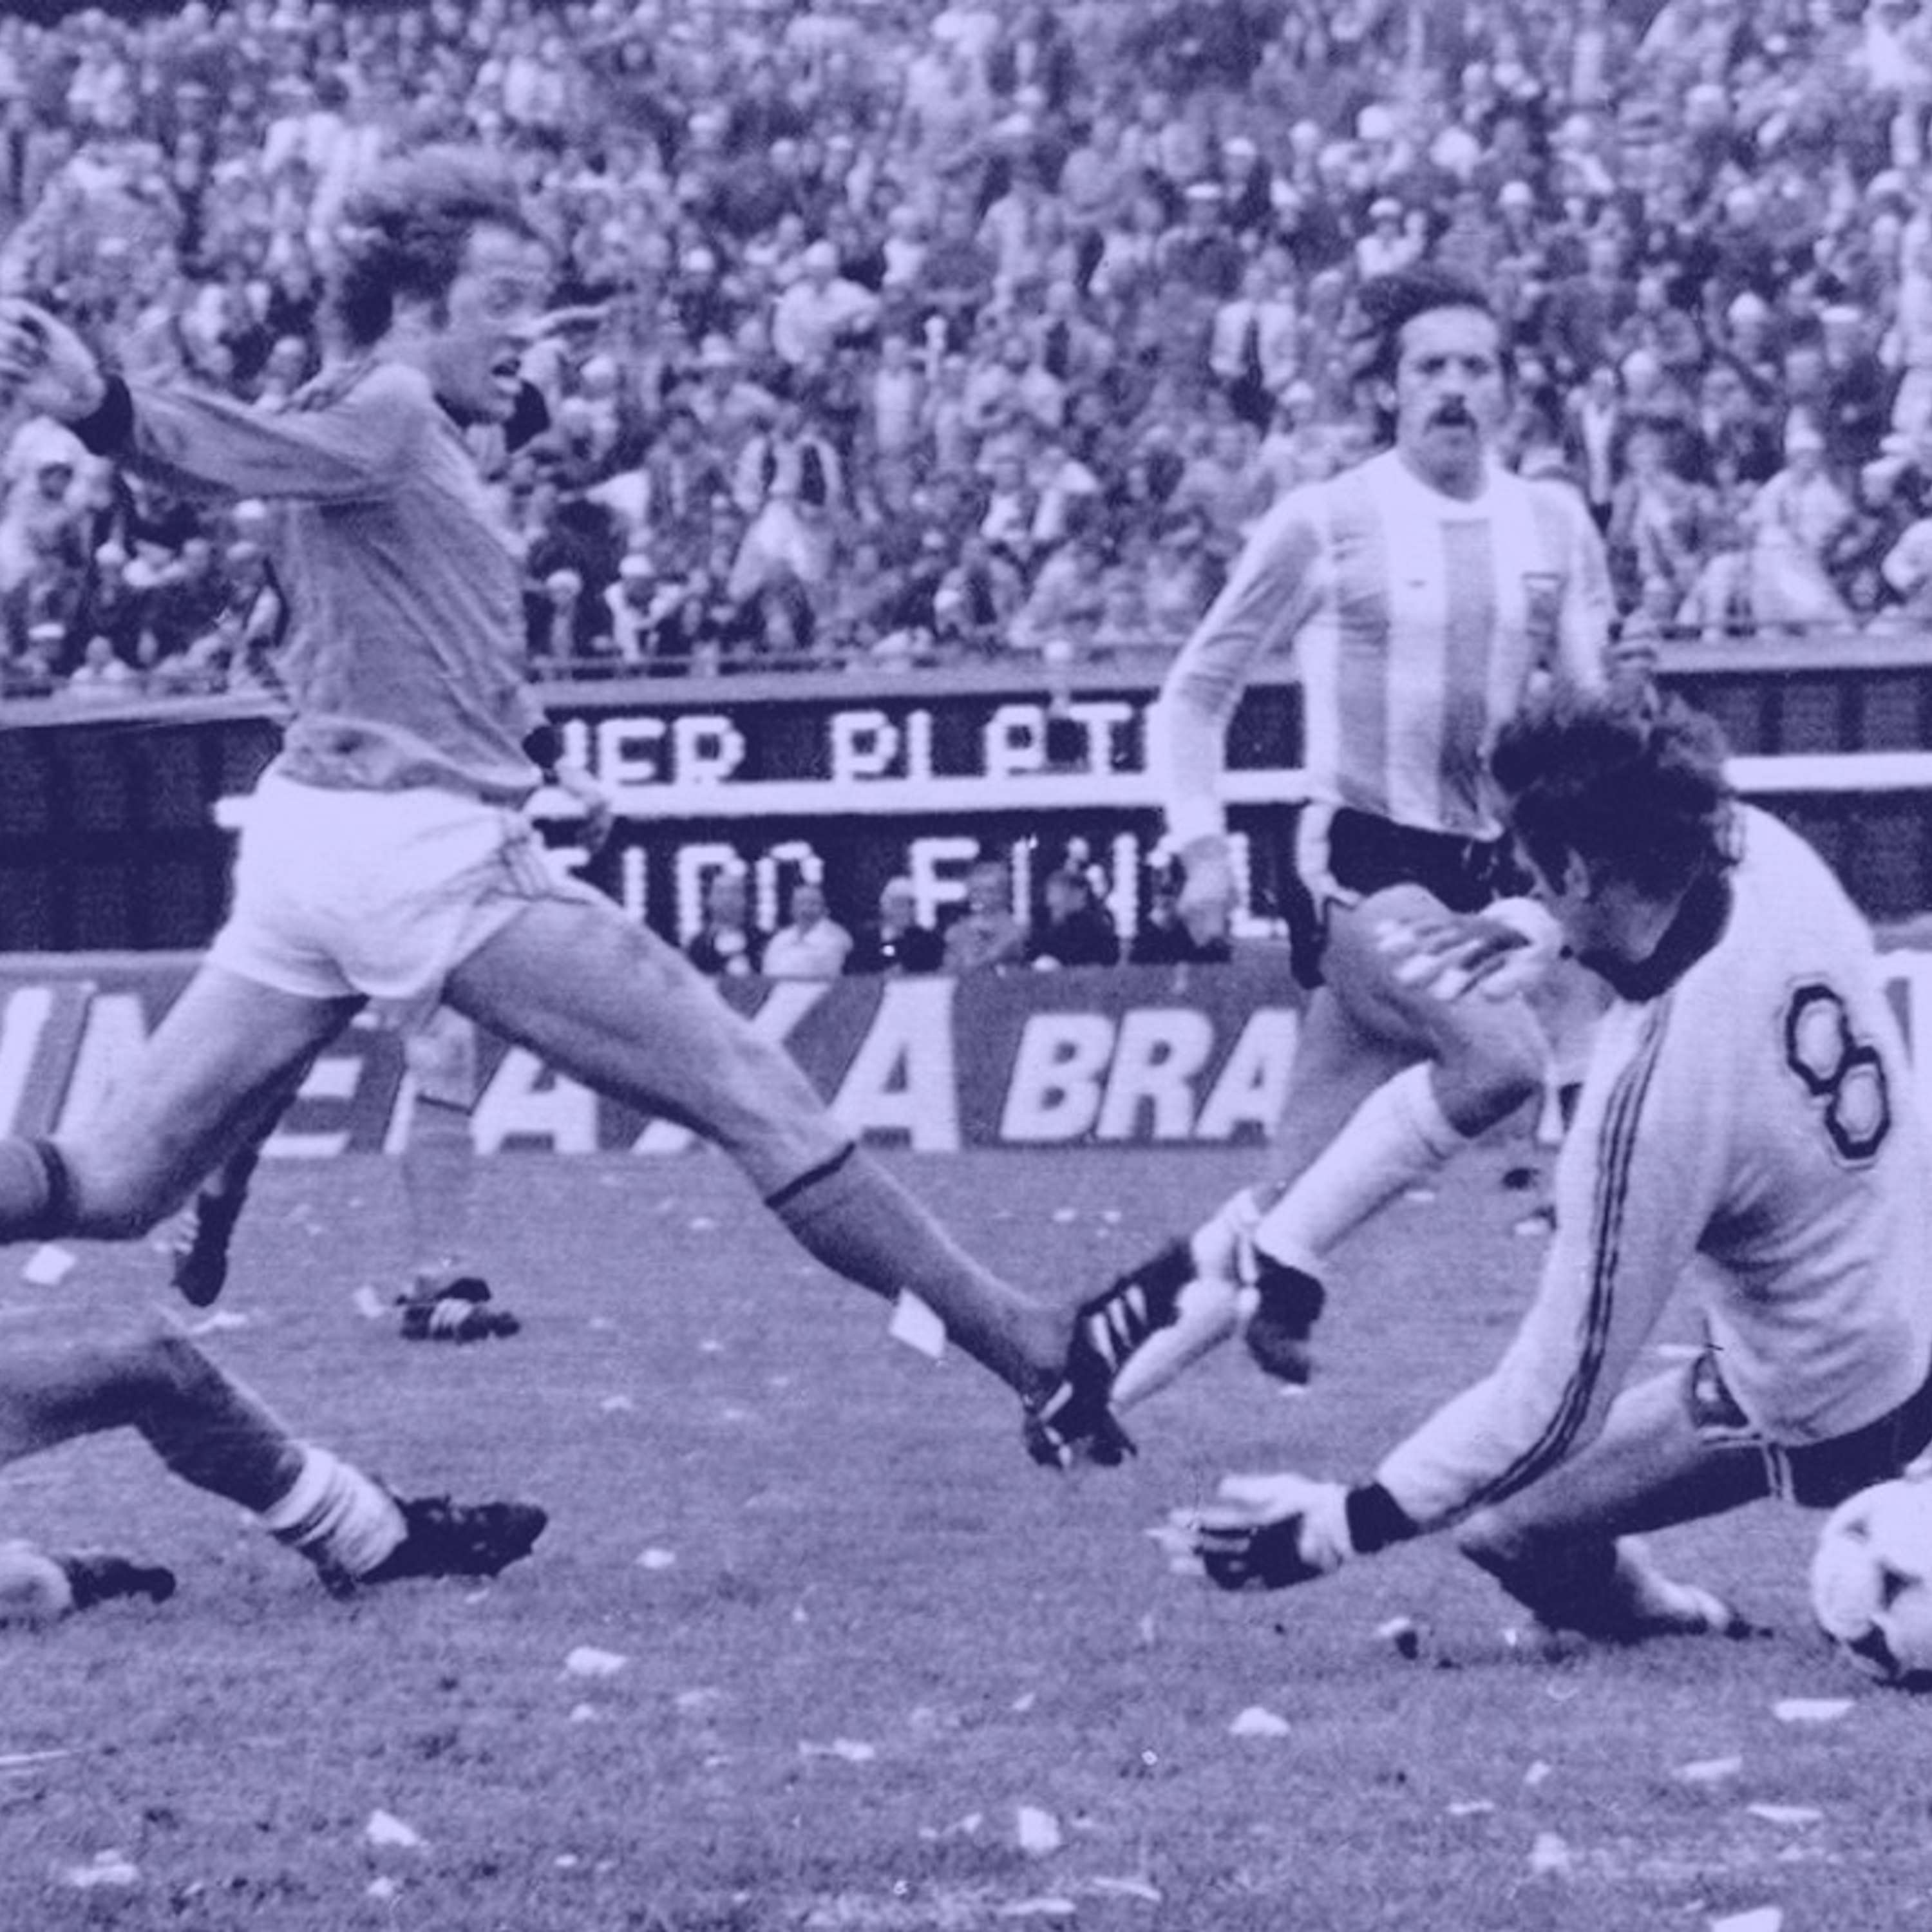 #450 | The 1978 World Cup in Argentina